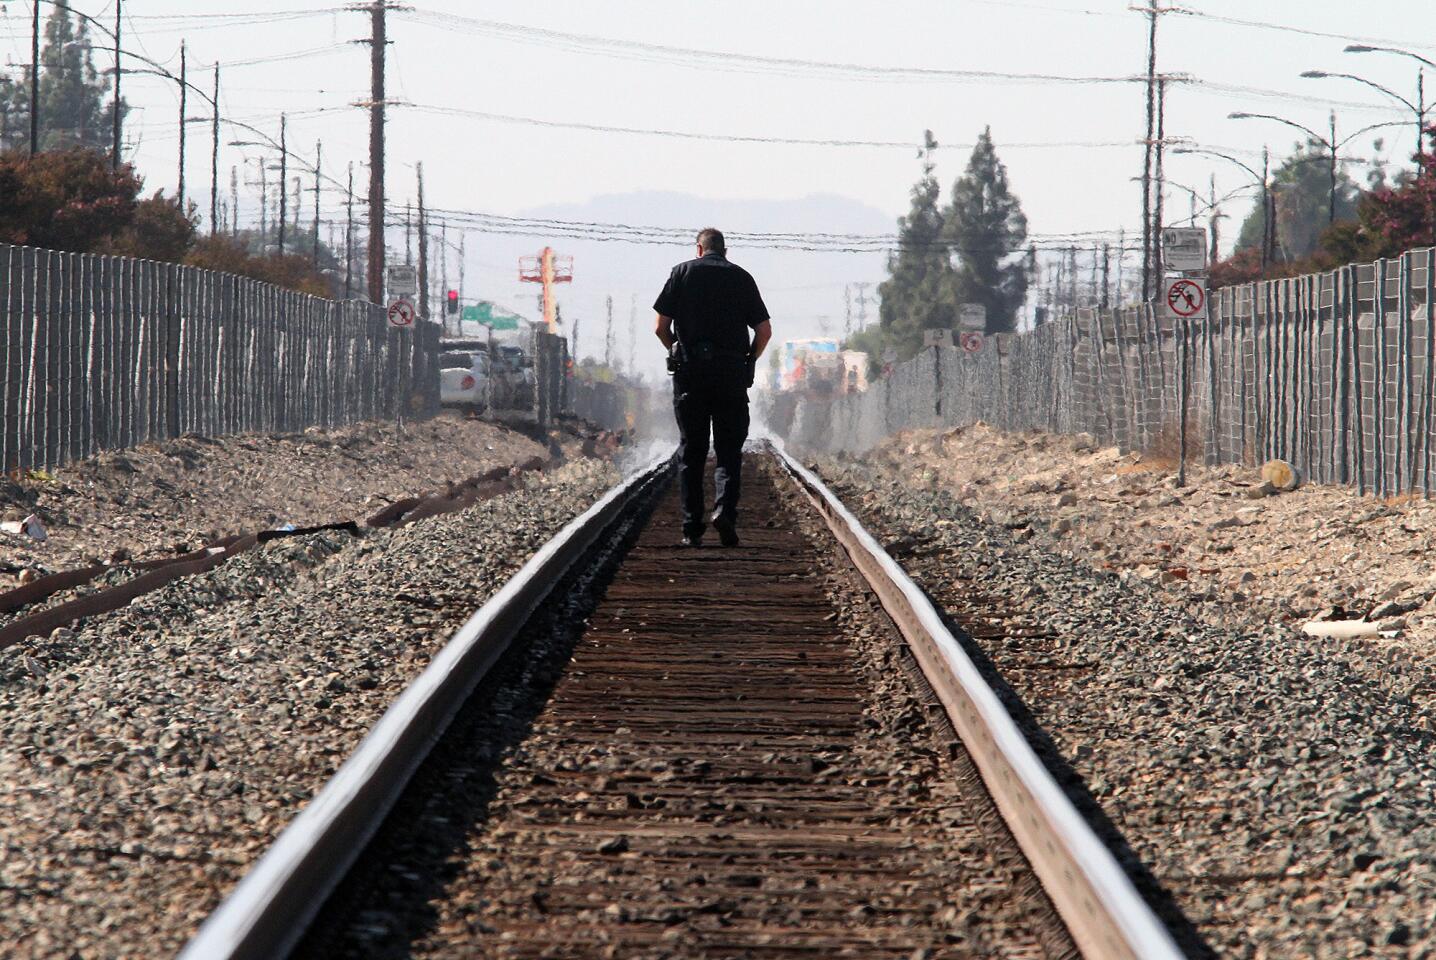 A Burbank police officer walks north observing the tracks where a Metrolink train collided with a motorist at the intersection of San Fernando and Buena Vista in Burbank on Monday, September 2, 2014. The southbound train struck a motorist allegedly driving around the downed crossing arms on Buena Vista, totaling the vehicle and sending the driver to the hospital with critical injuries.